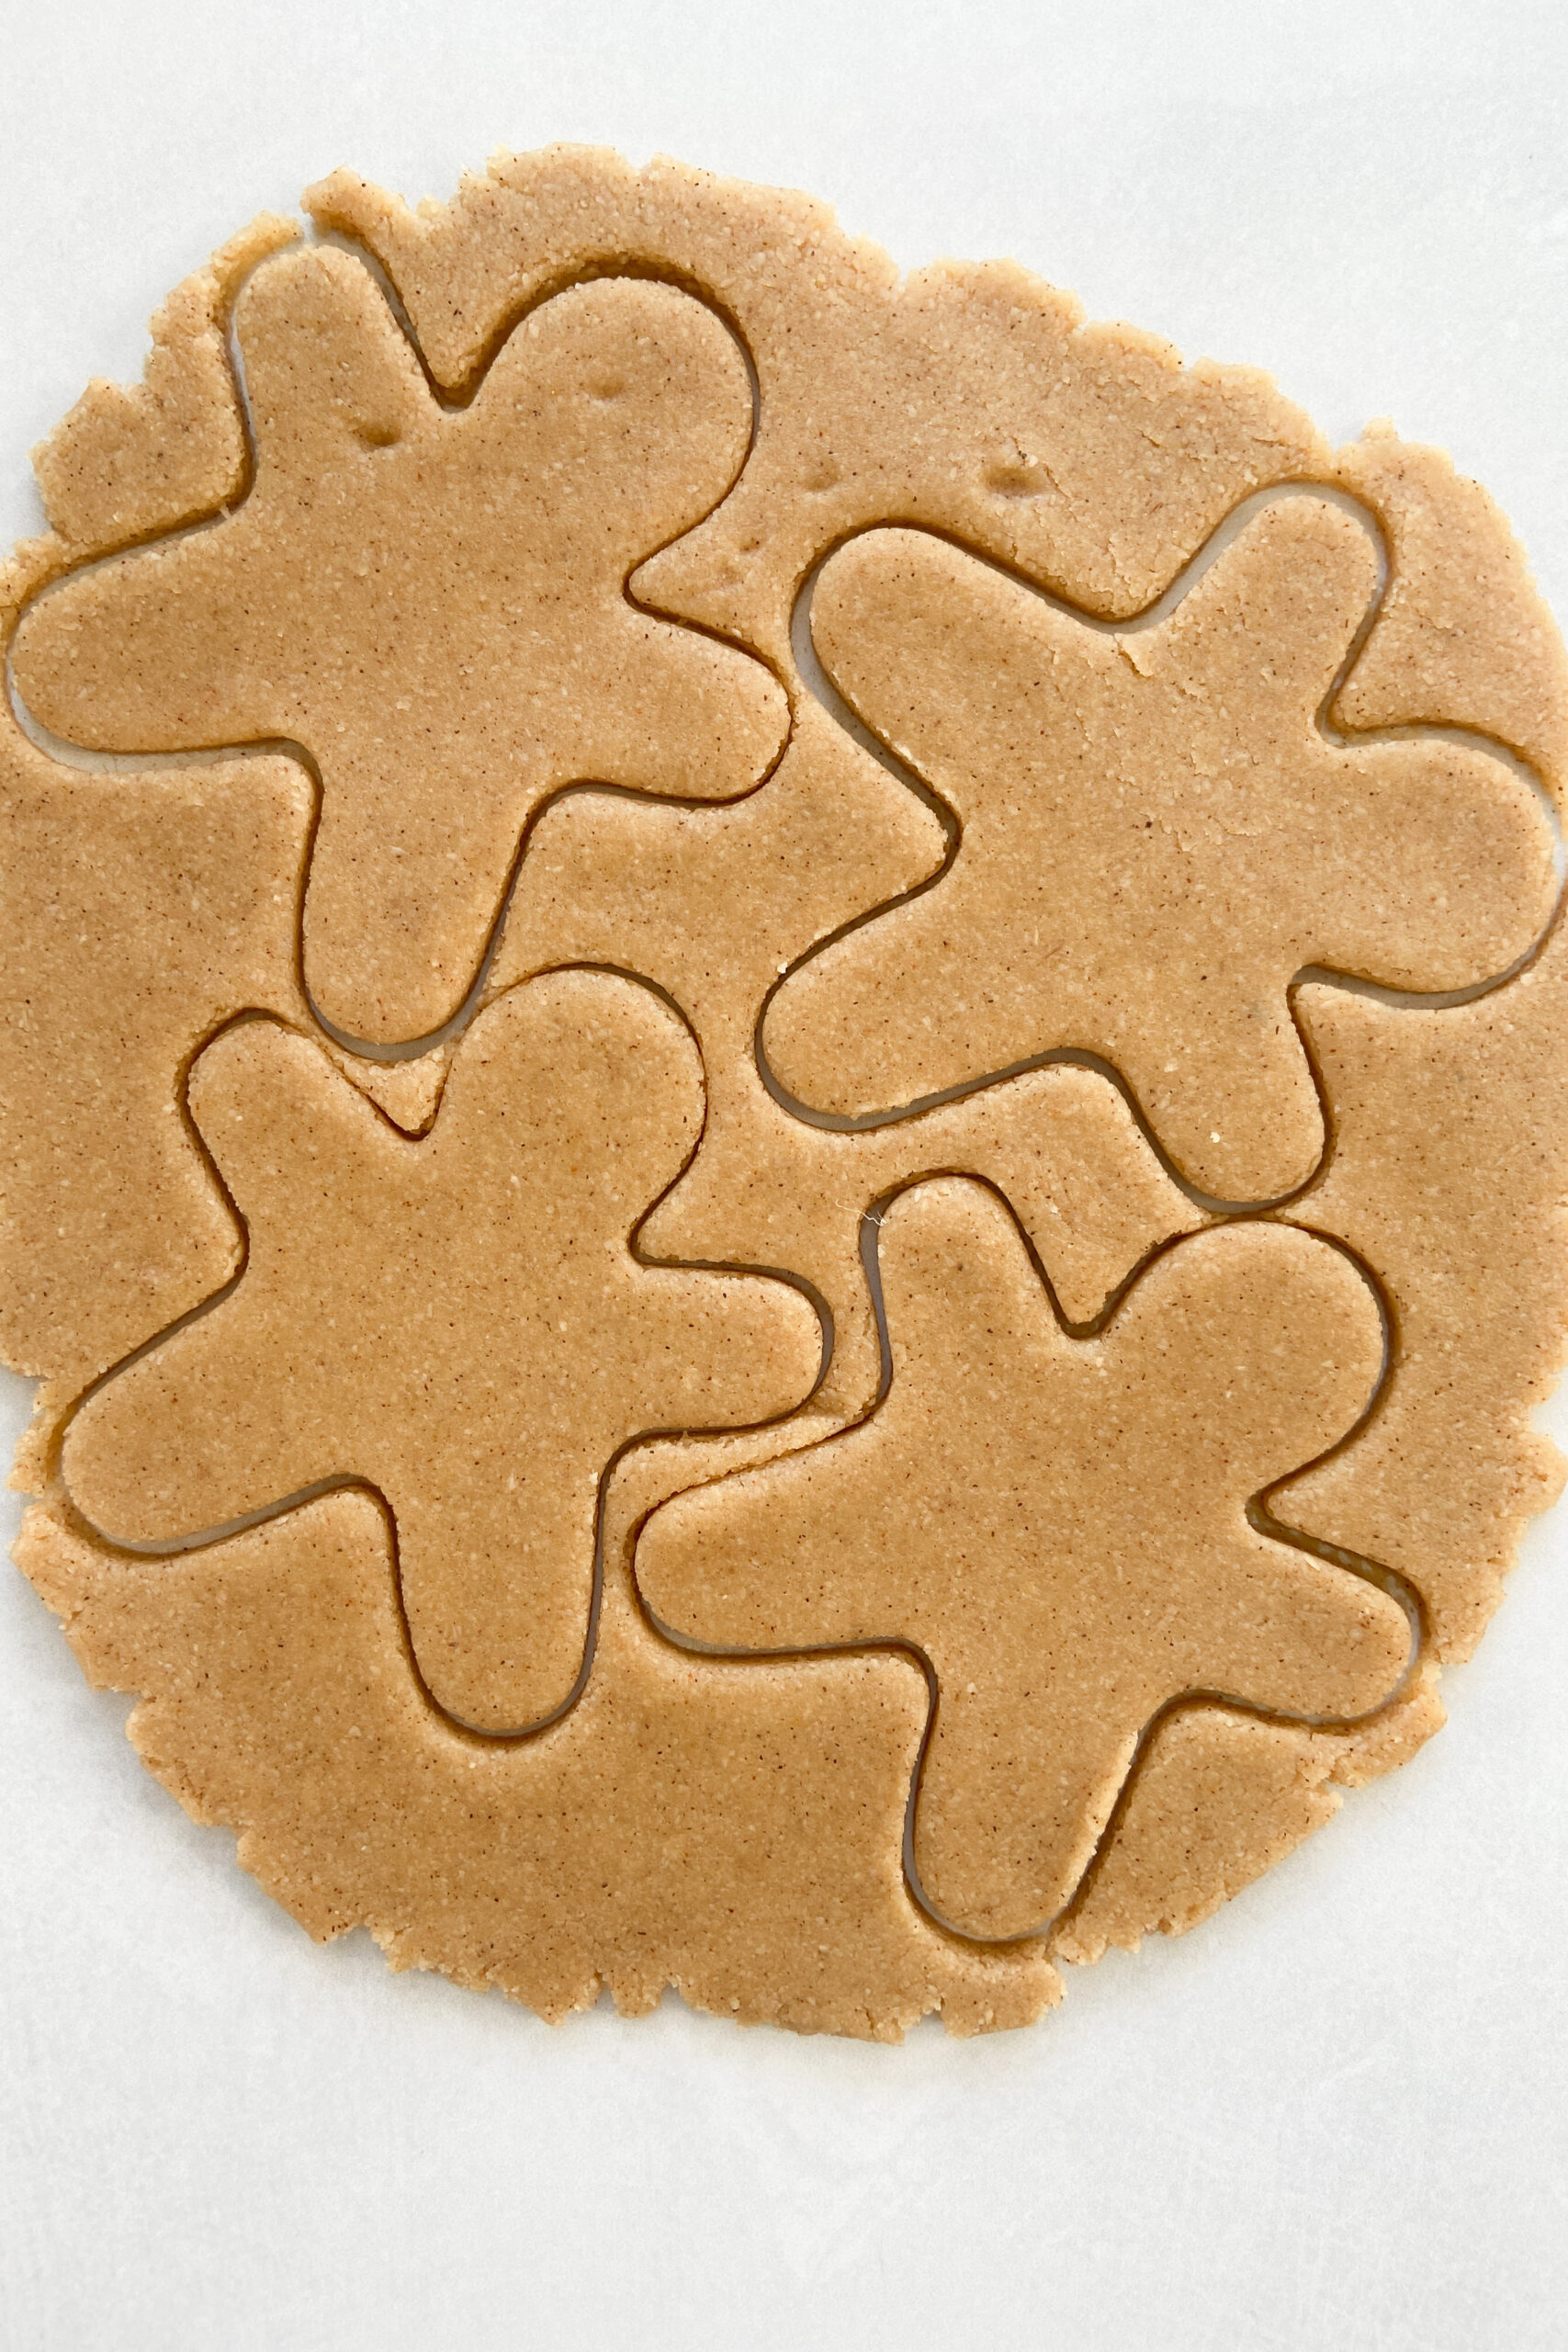 Gingerbread men being cut out of dough.